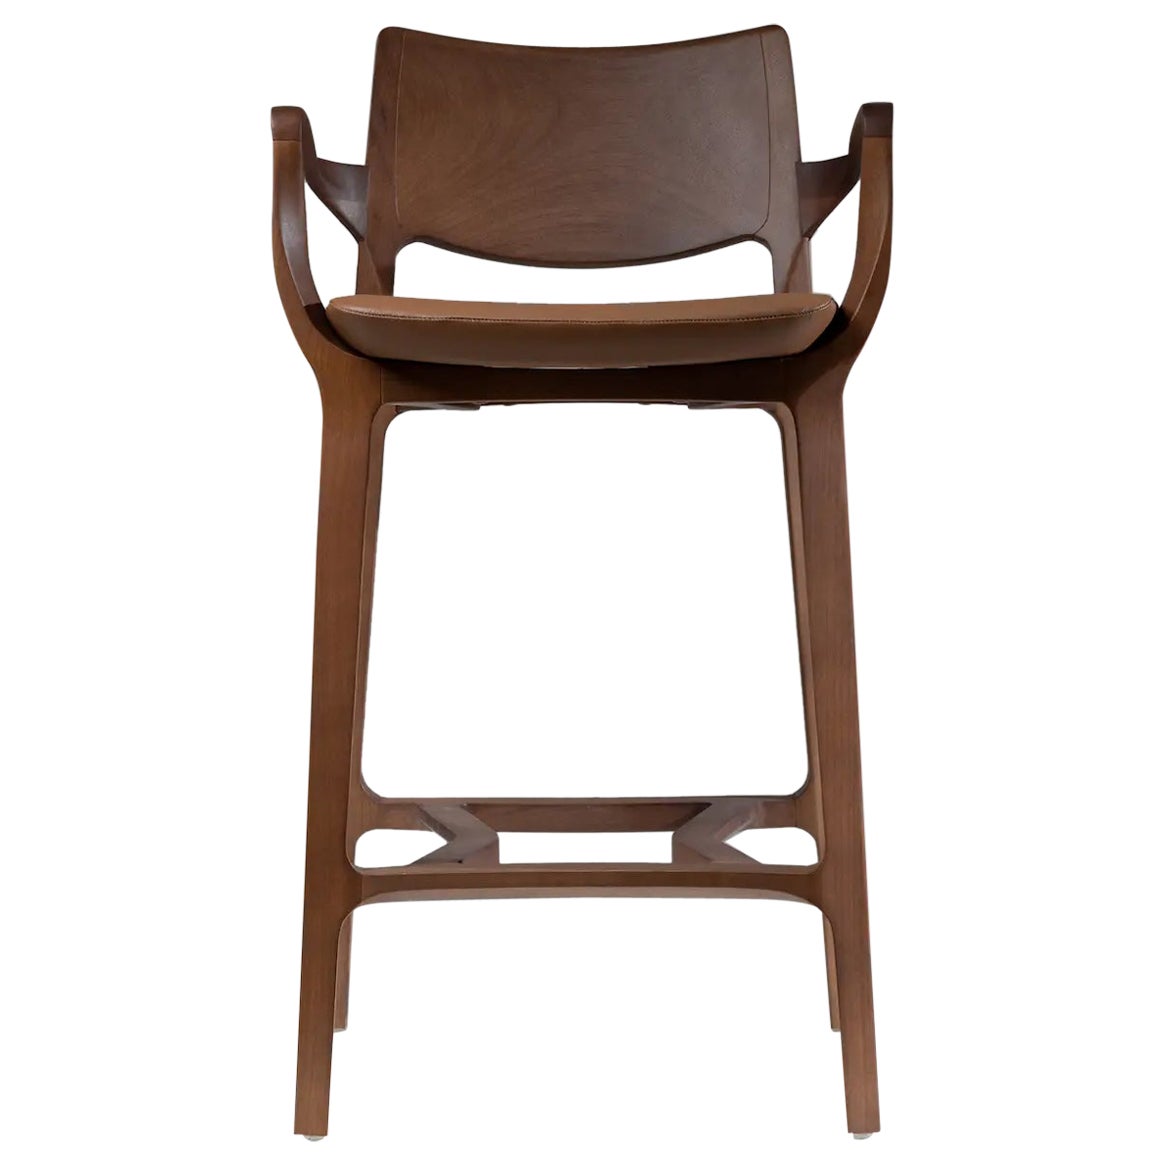 Post Modern Stool in Walnut Finish, Cane Back Leather Seat, Counter or Bar Hight For Sale